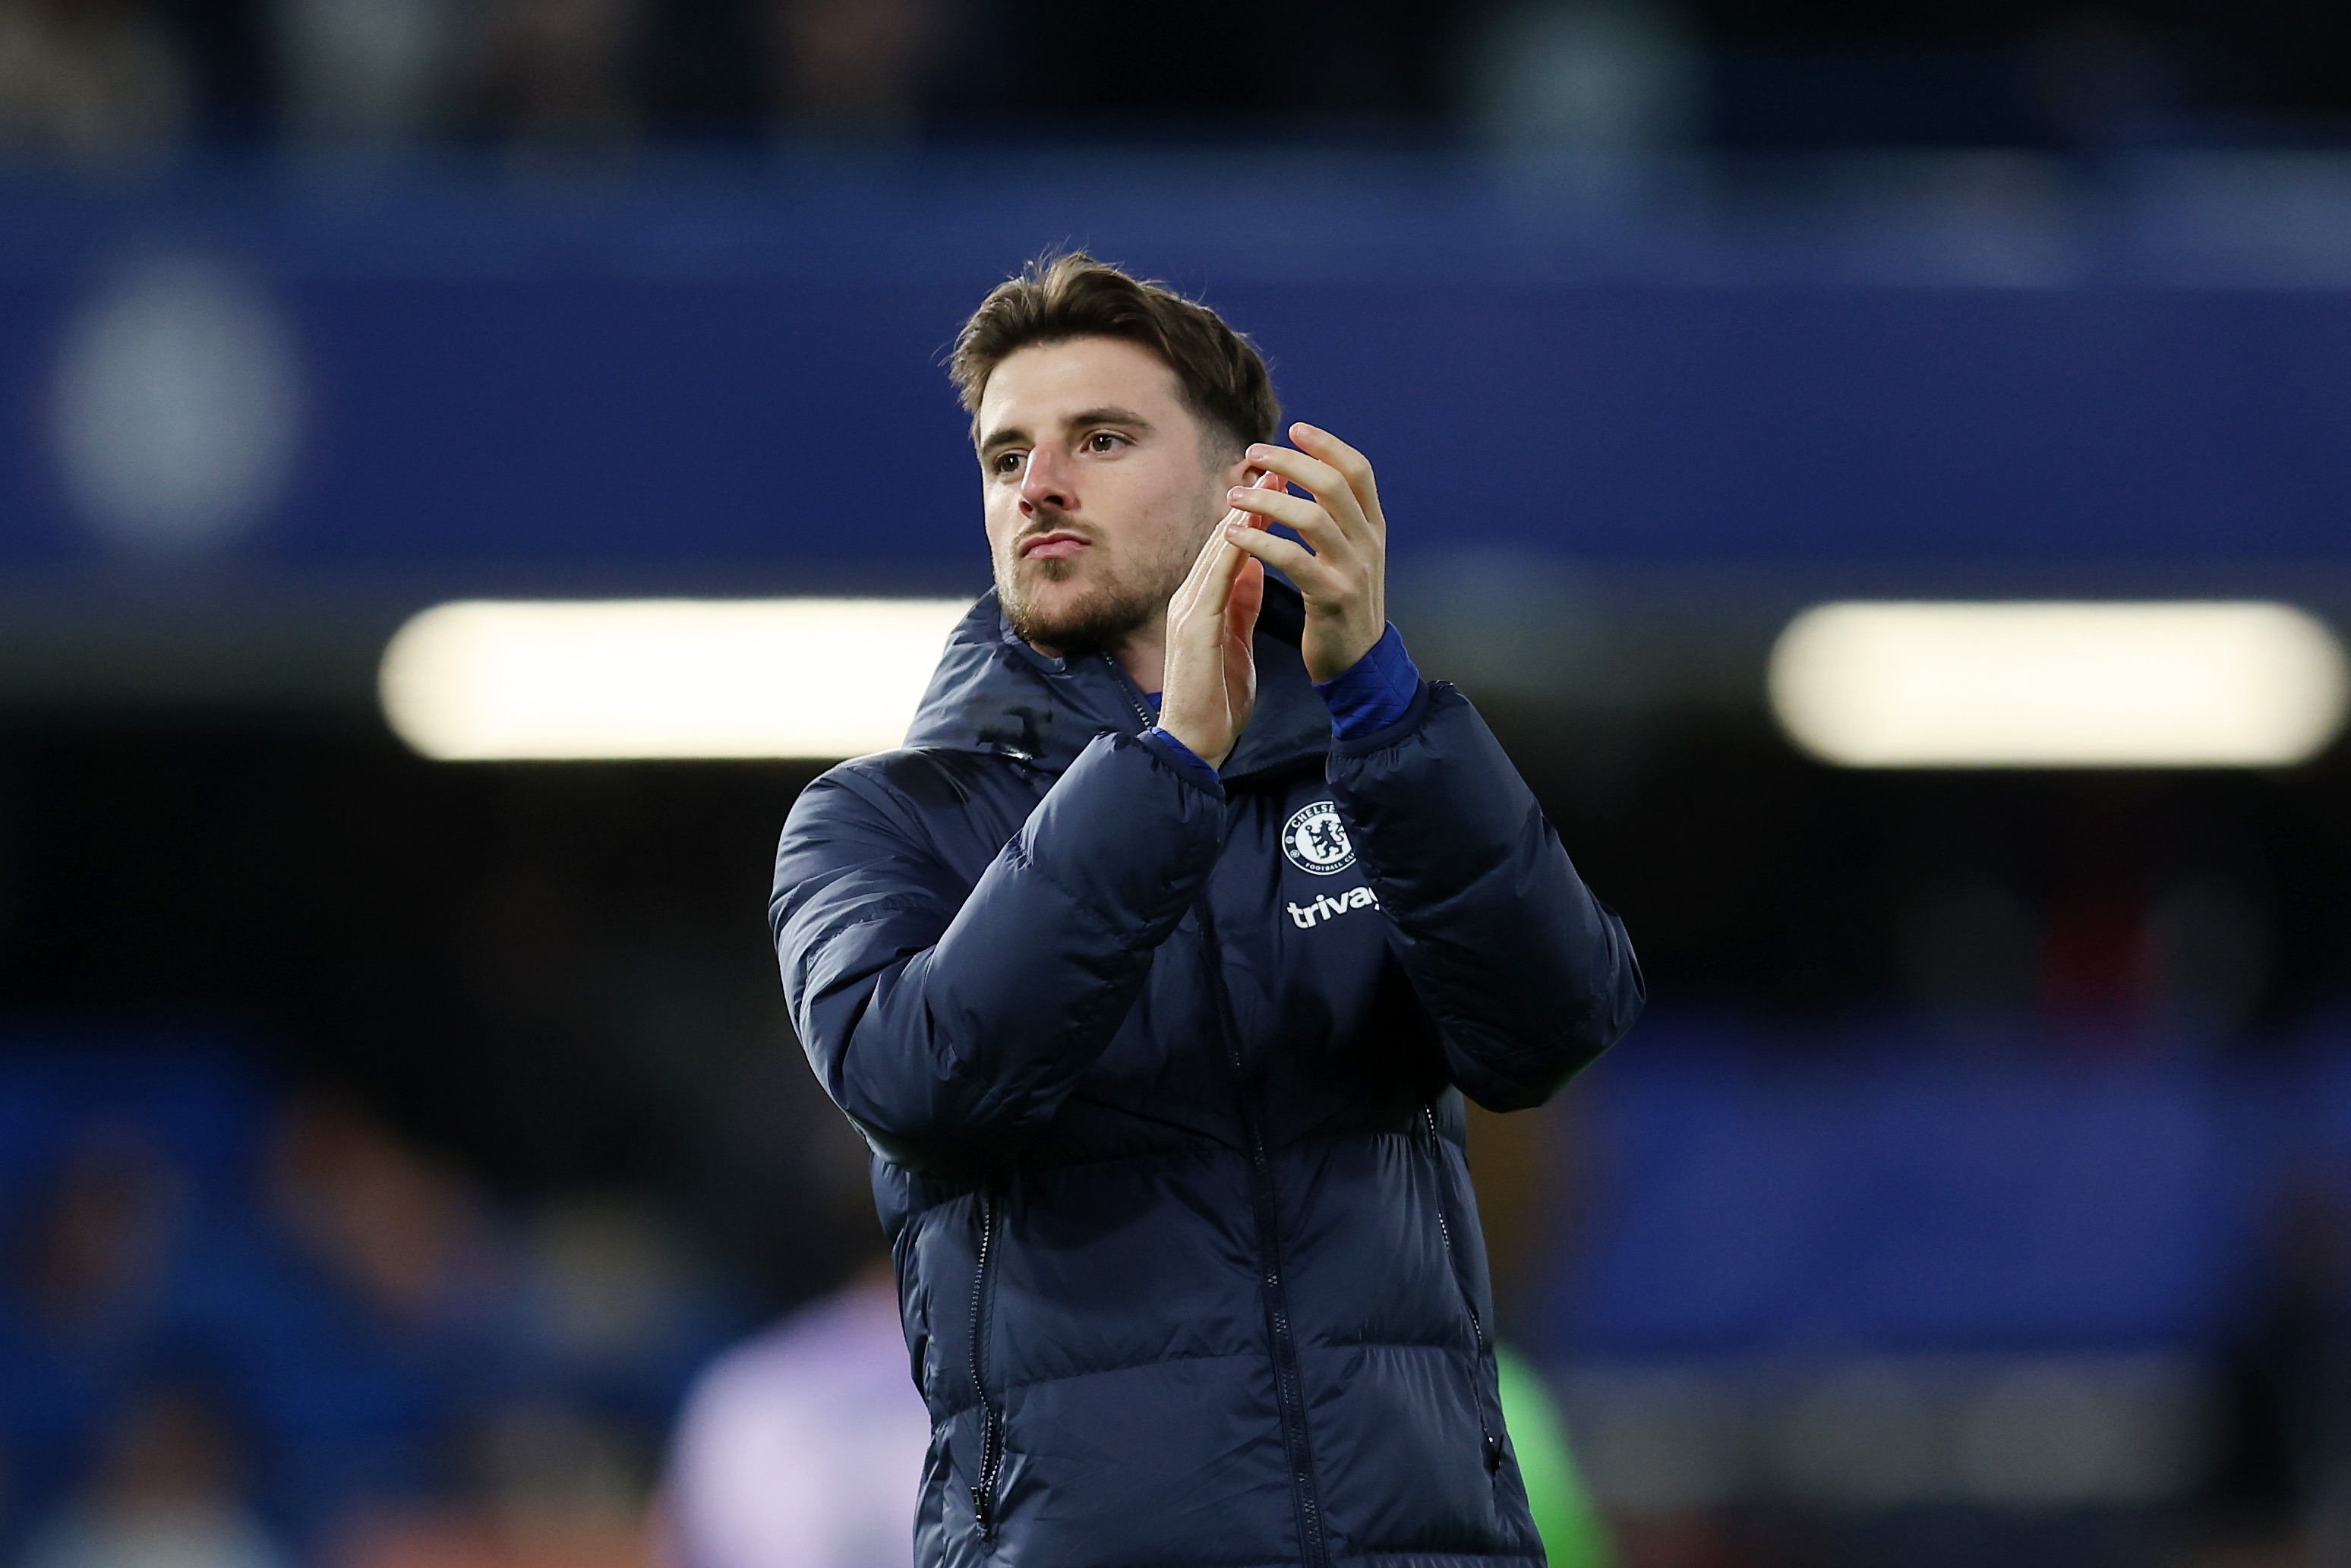 LONDON, ENGLAND - APRIL 04: Mason Mount of Chelsea applauds the fans after the draw in the Premier League match between Chelsea FC and Liverpool FC at Stamford Bridge on April 04, 2023 in London, England. (Photo by Chris Lee - Chelsea FC/Chelsea FC via Getty Images)